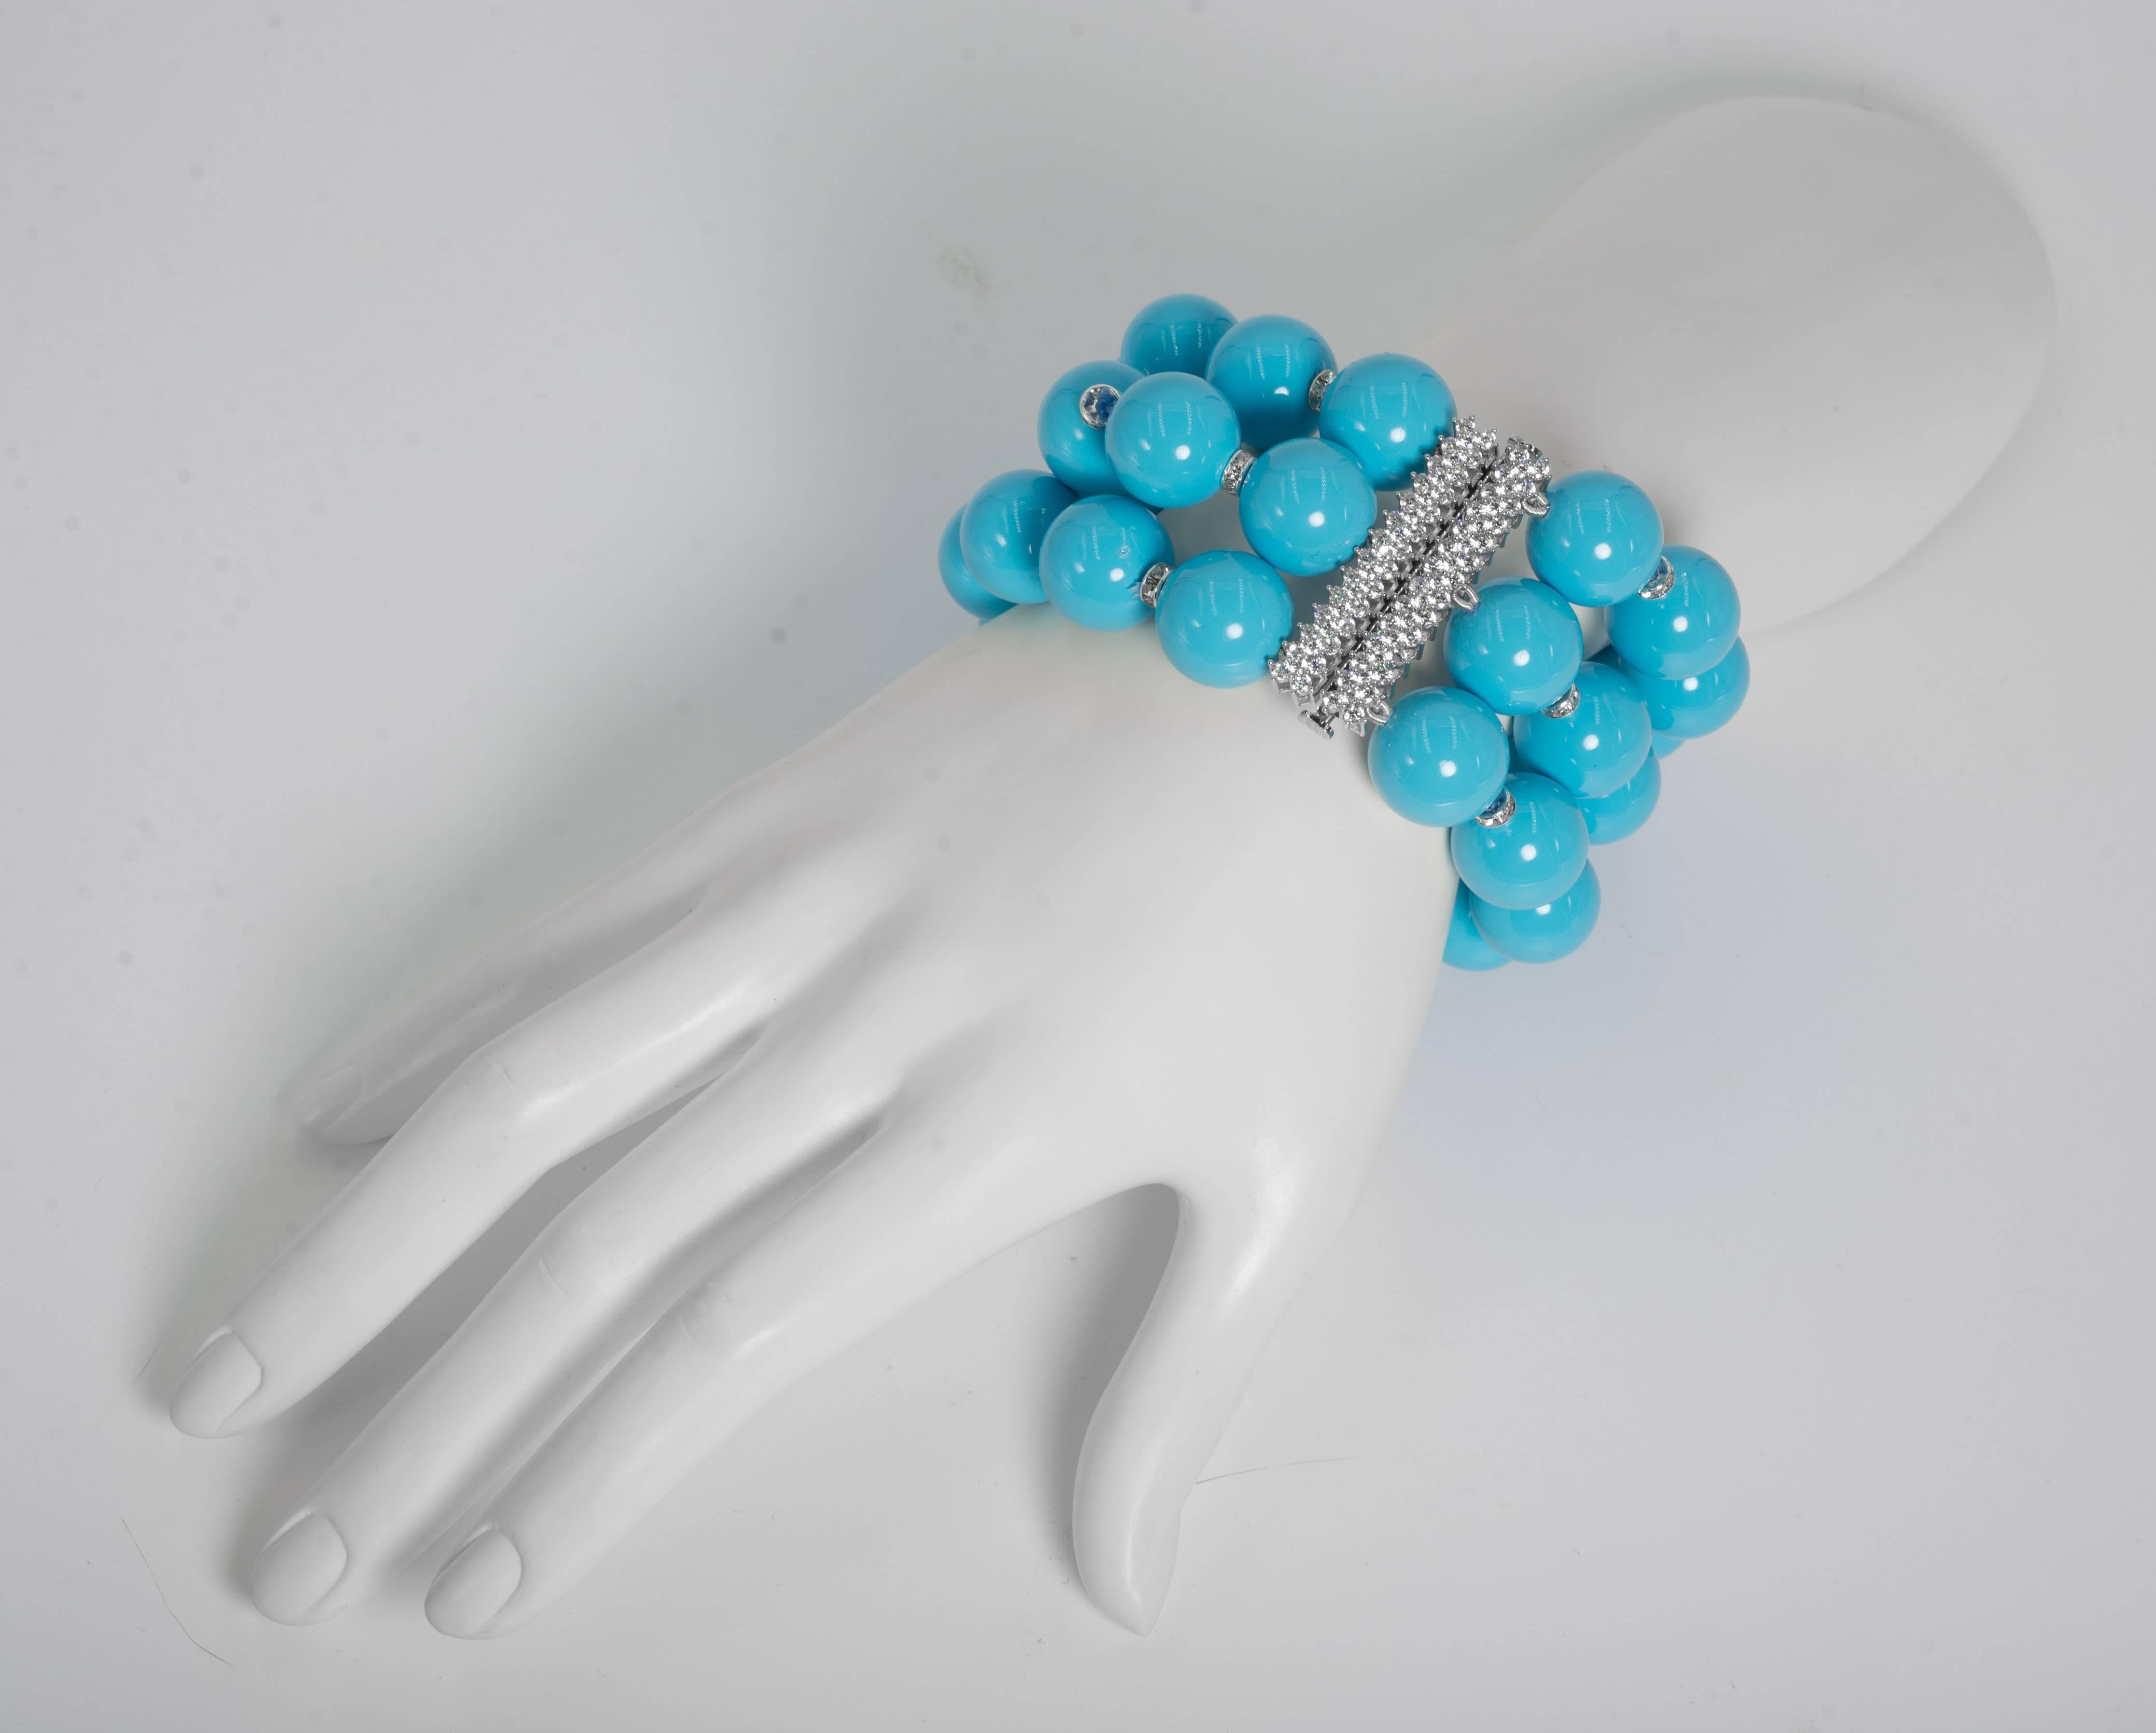 Three strands of 20mm faux turquoise  beads interspersed with crystal rondels silk knotted and strung attached to a cubic zirconia sterling fine jewelled clasp. The bracelet measures nine inches long for the height of the 20mm beads and  is two